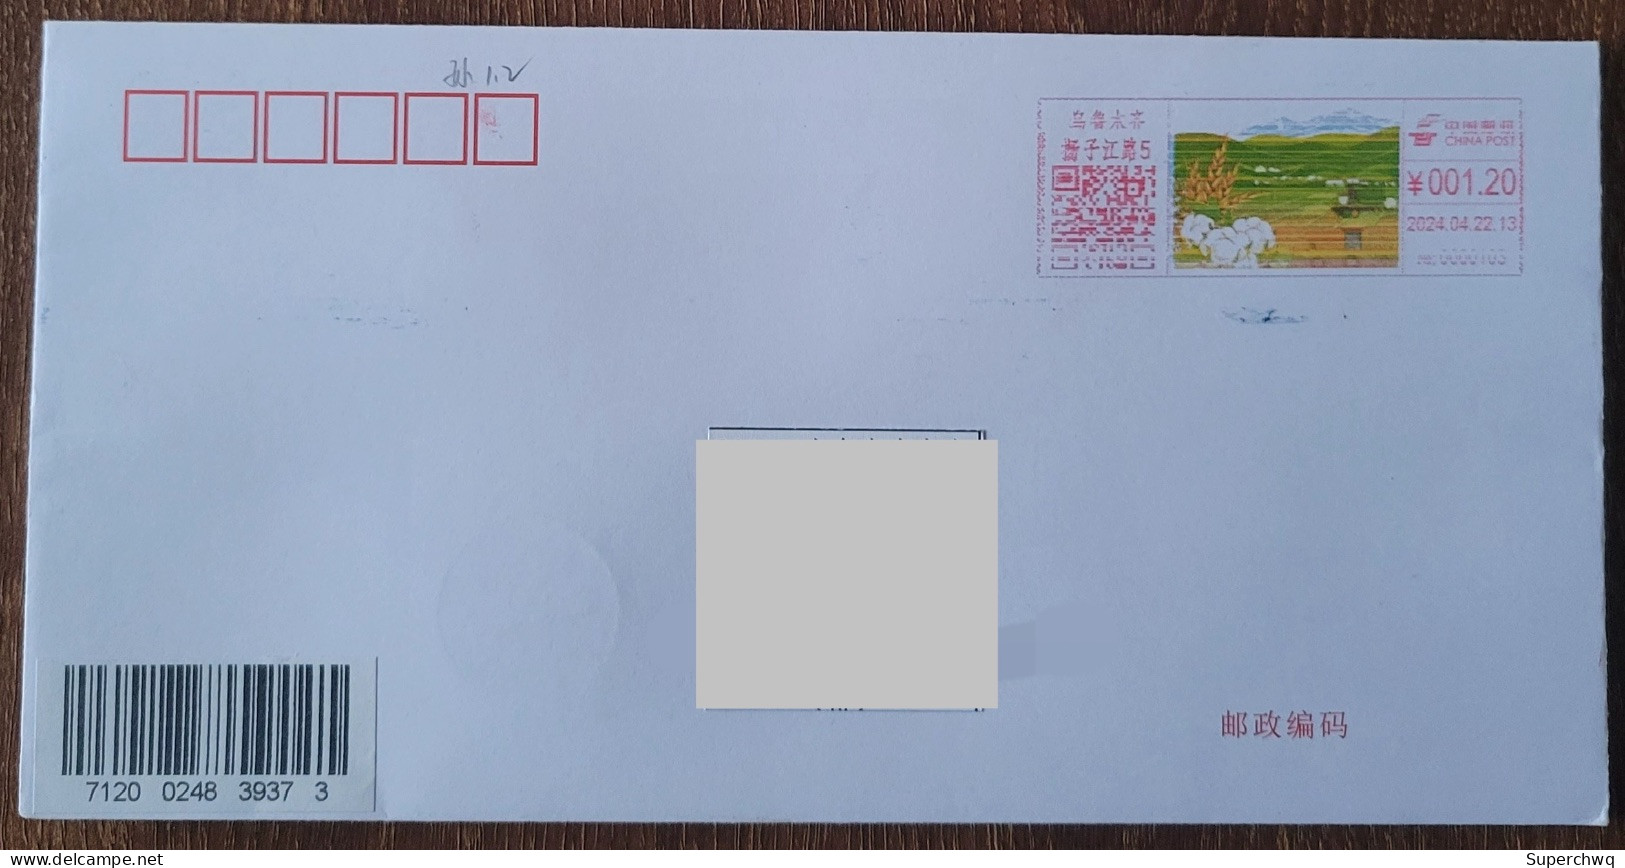 China Cover "Our Fields" (Urumqi) Colored Postage Machine Stamped First Day Actual Delivery Seal - Enveloppes